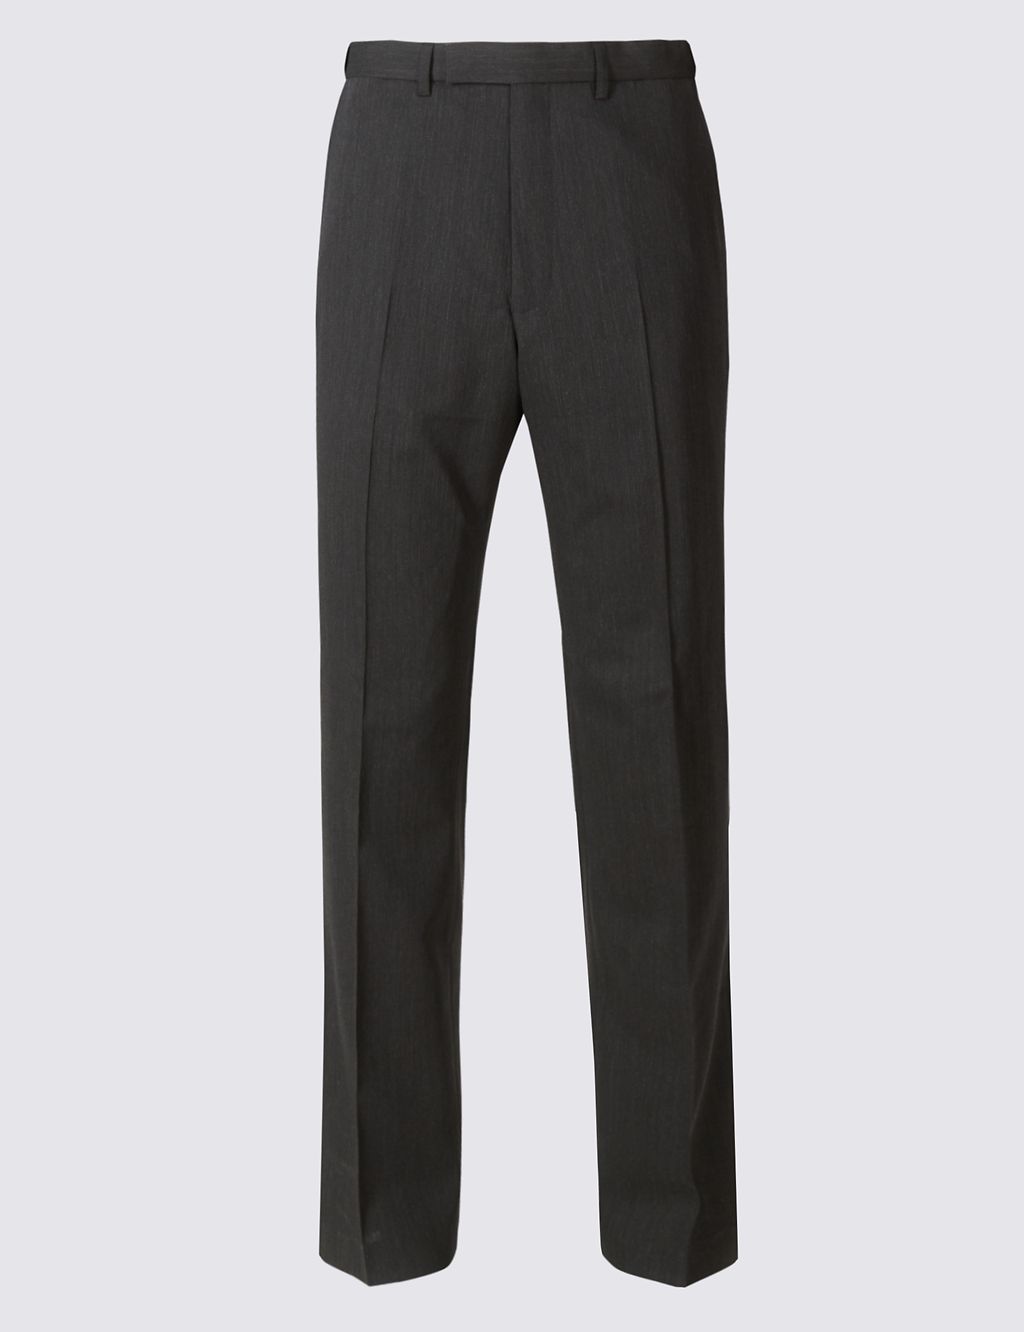 Charcoal Textured Regular Fit Trousers 1 of 6